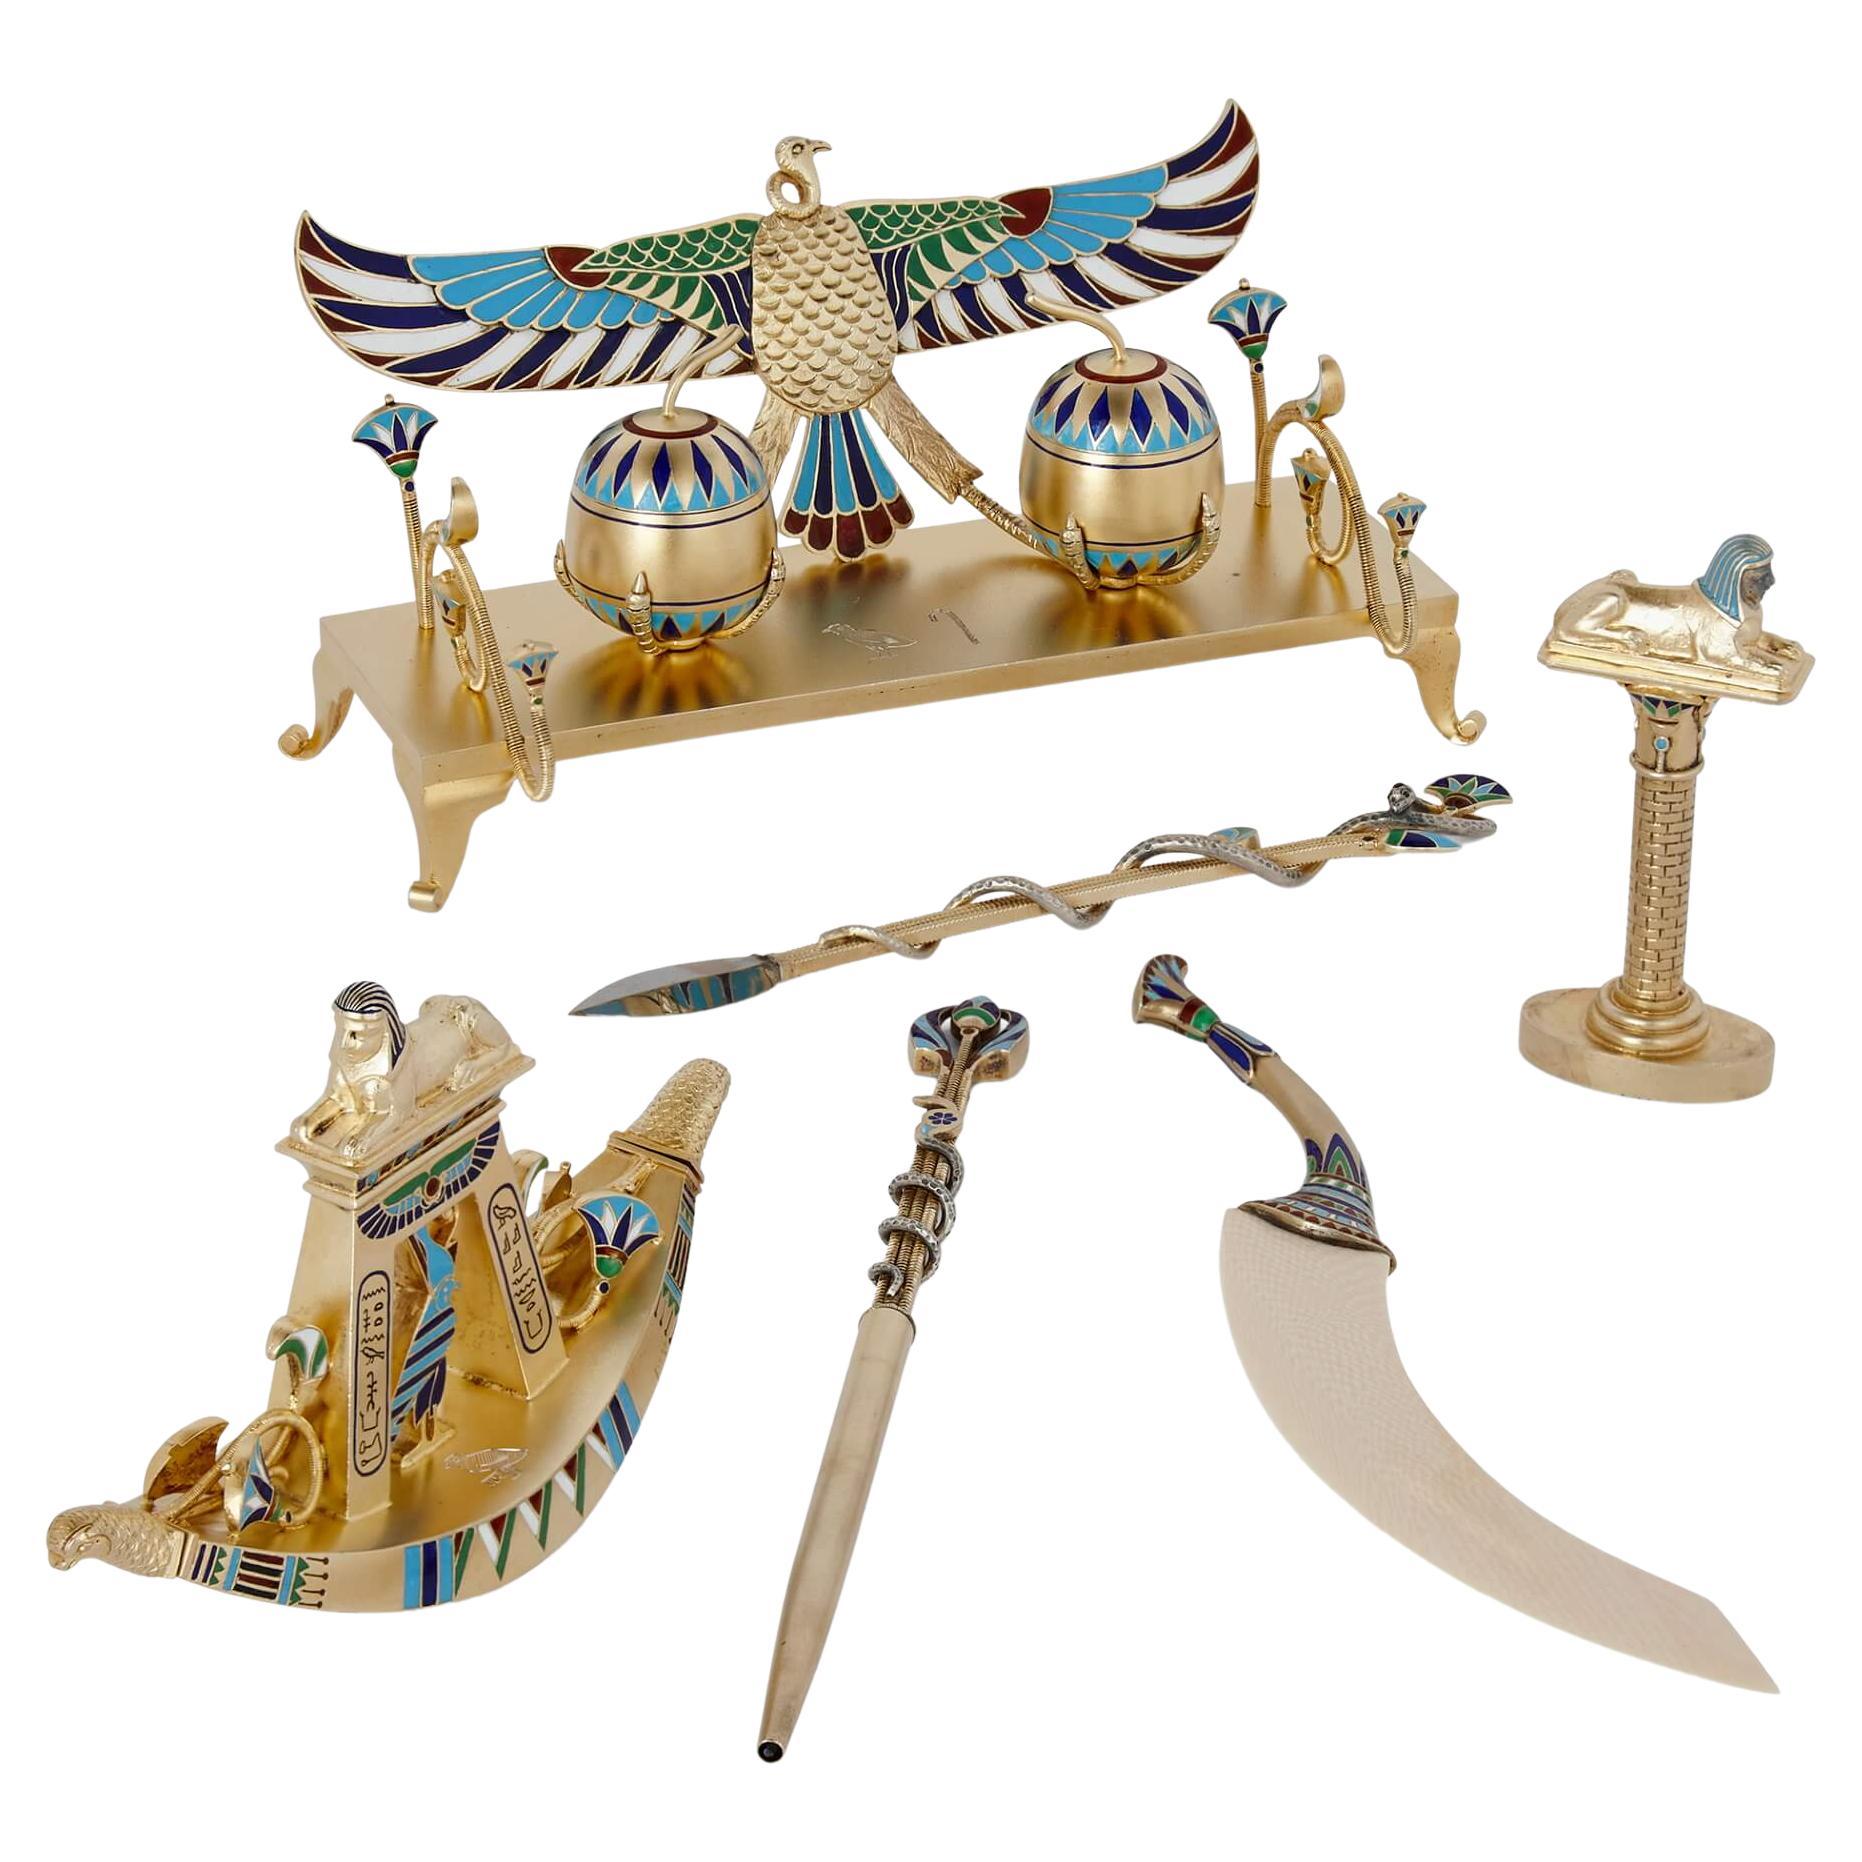 Art Deco period Egyptian revival style enamel and silver-gilt desk set For Sale